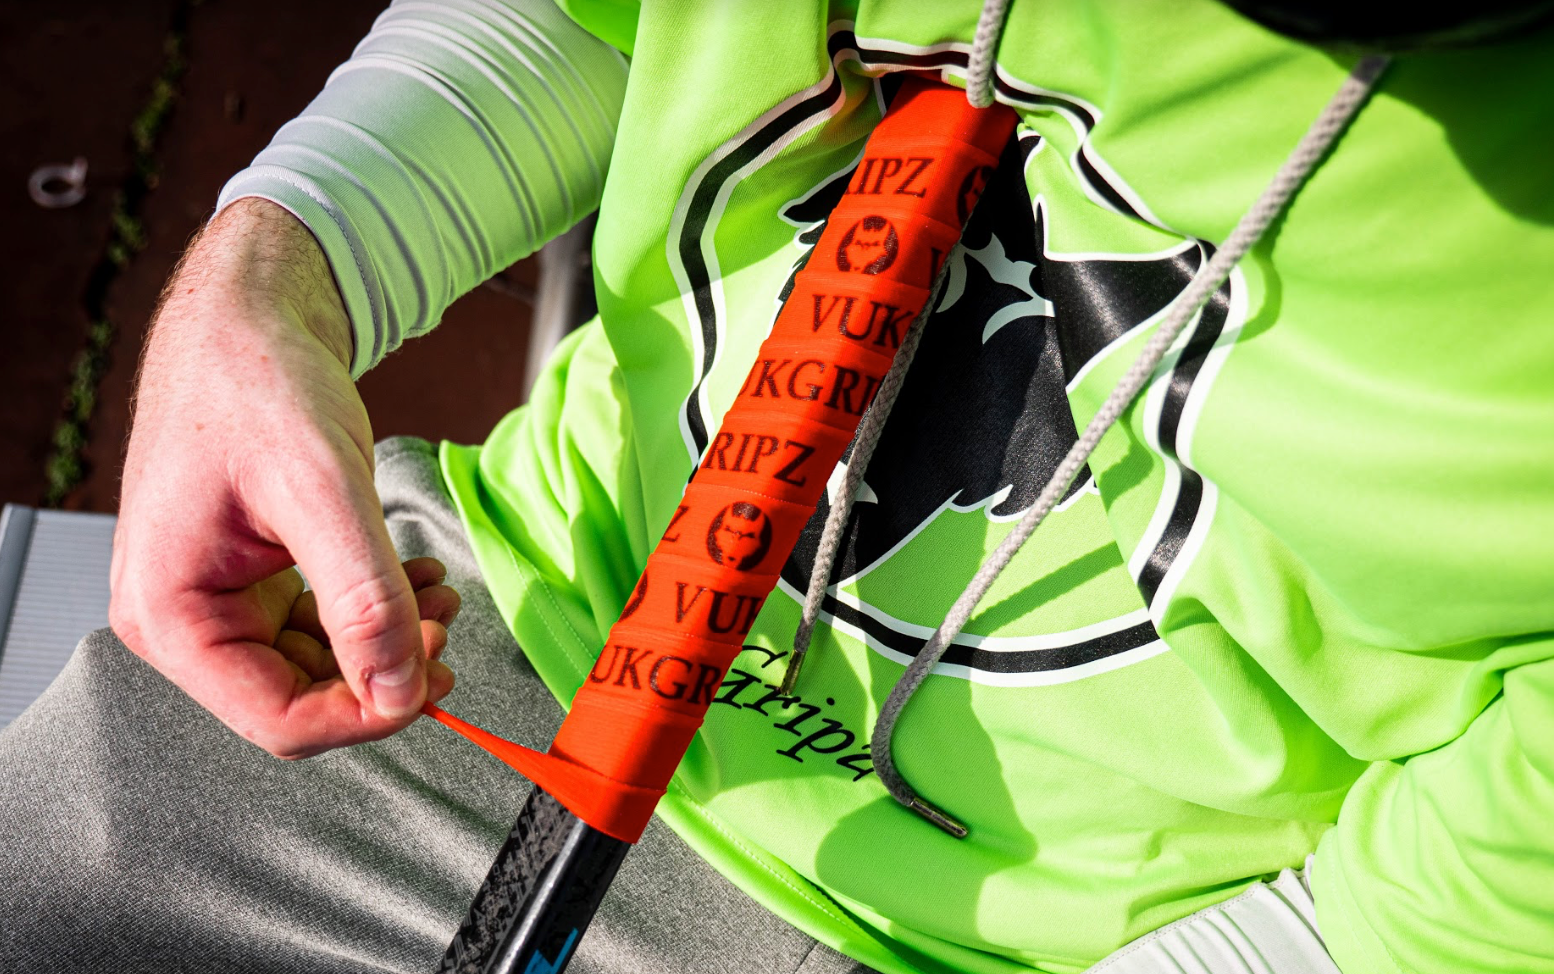 How to Tape a Hockey Stick: From the Blade to the Handle and Butt